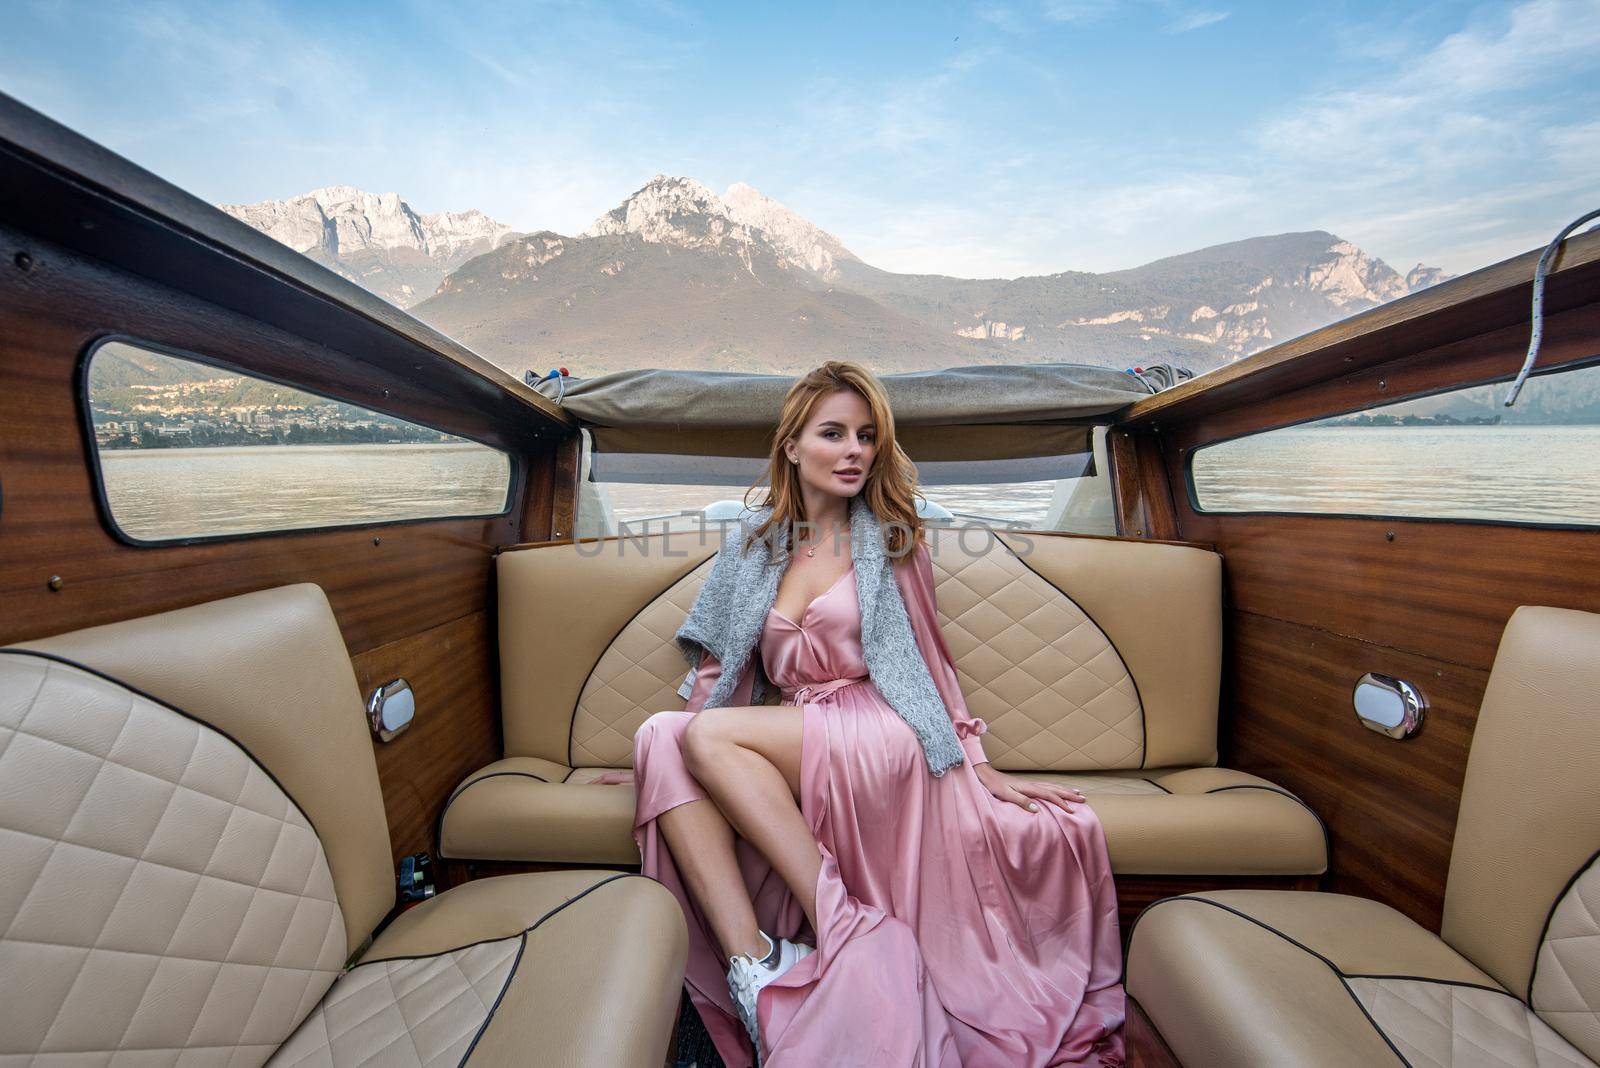 Luxury boat trip at Lake Como at romantic honeymoon. Luxury wedding and holiday concept. High quality photo